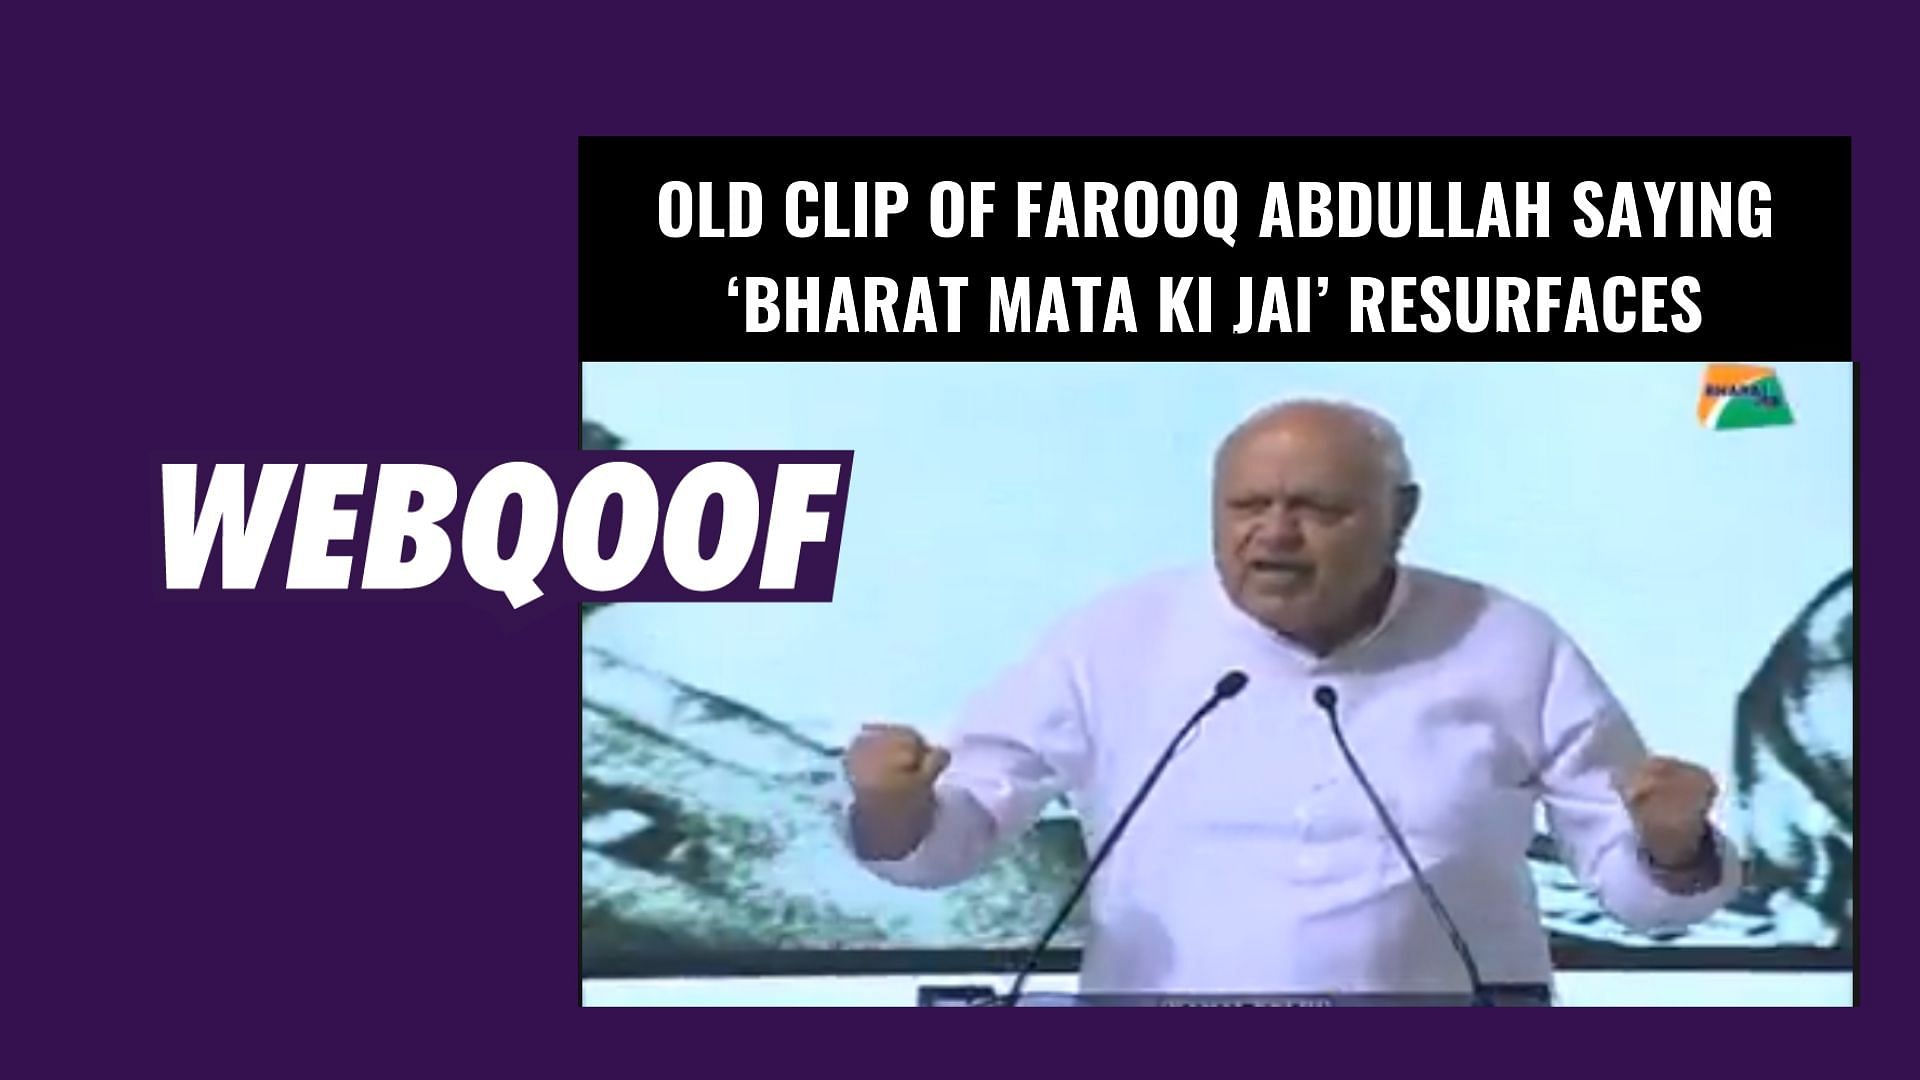 Farooq Abdullah Viral Video: A viral video has been doing rounds on the social media which shows National Conference Chief, Farooq Abdullah saying “Bharat Mata ki jai.”